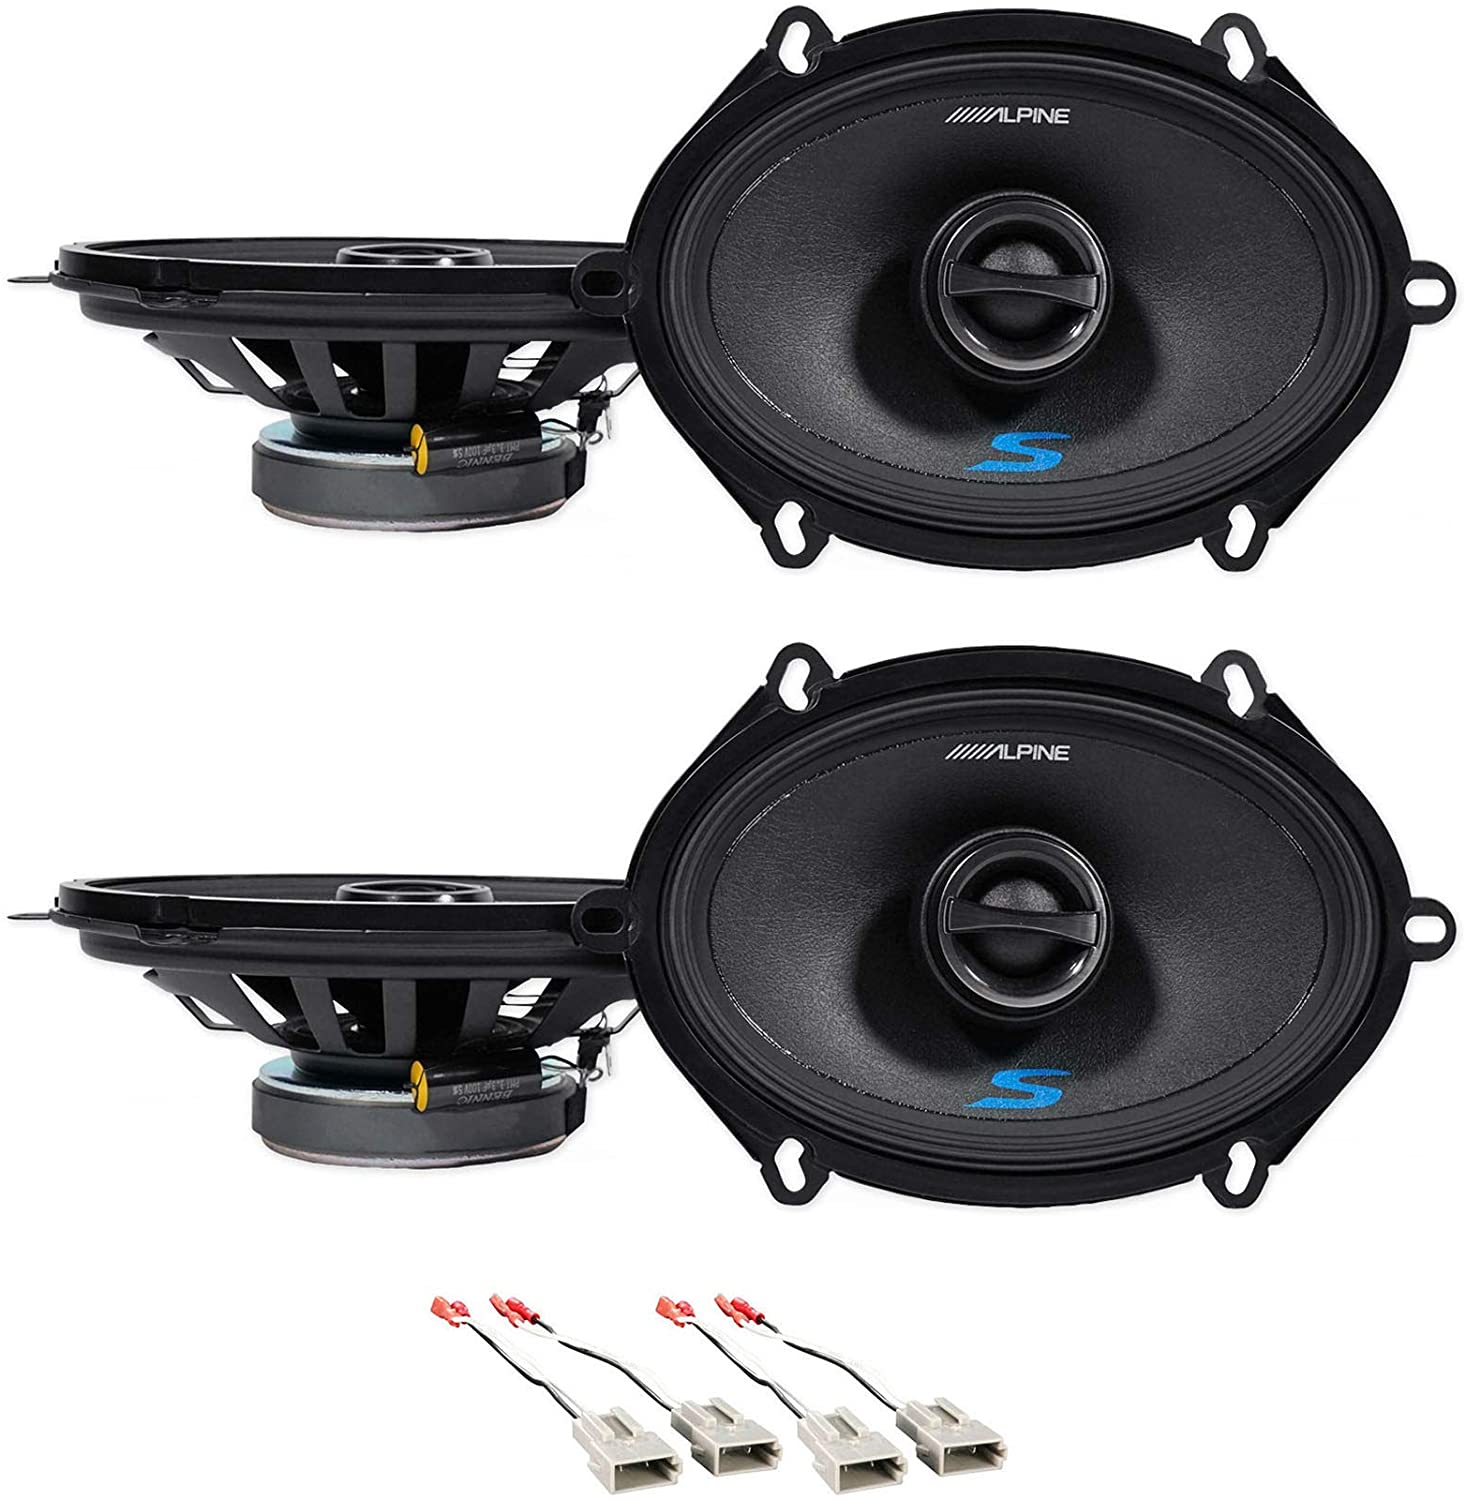 Front+Rear Alpine S 5x7" Speaker Replacement Kit For 1989-1997 Ford Thunderbird